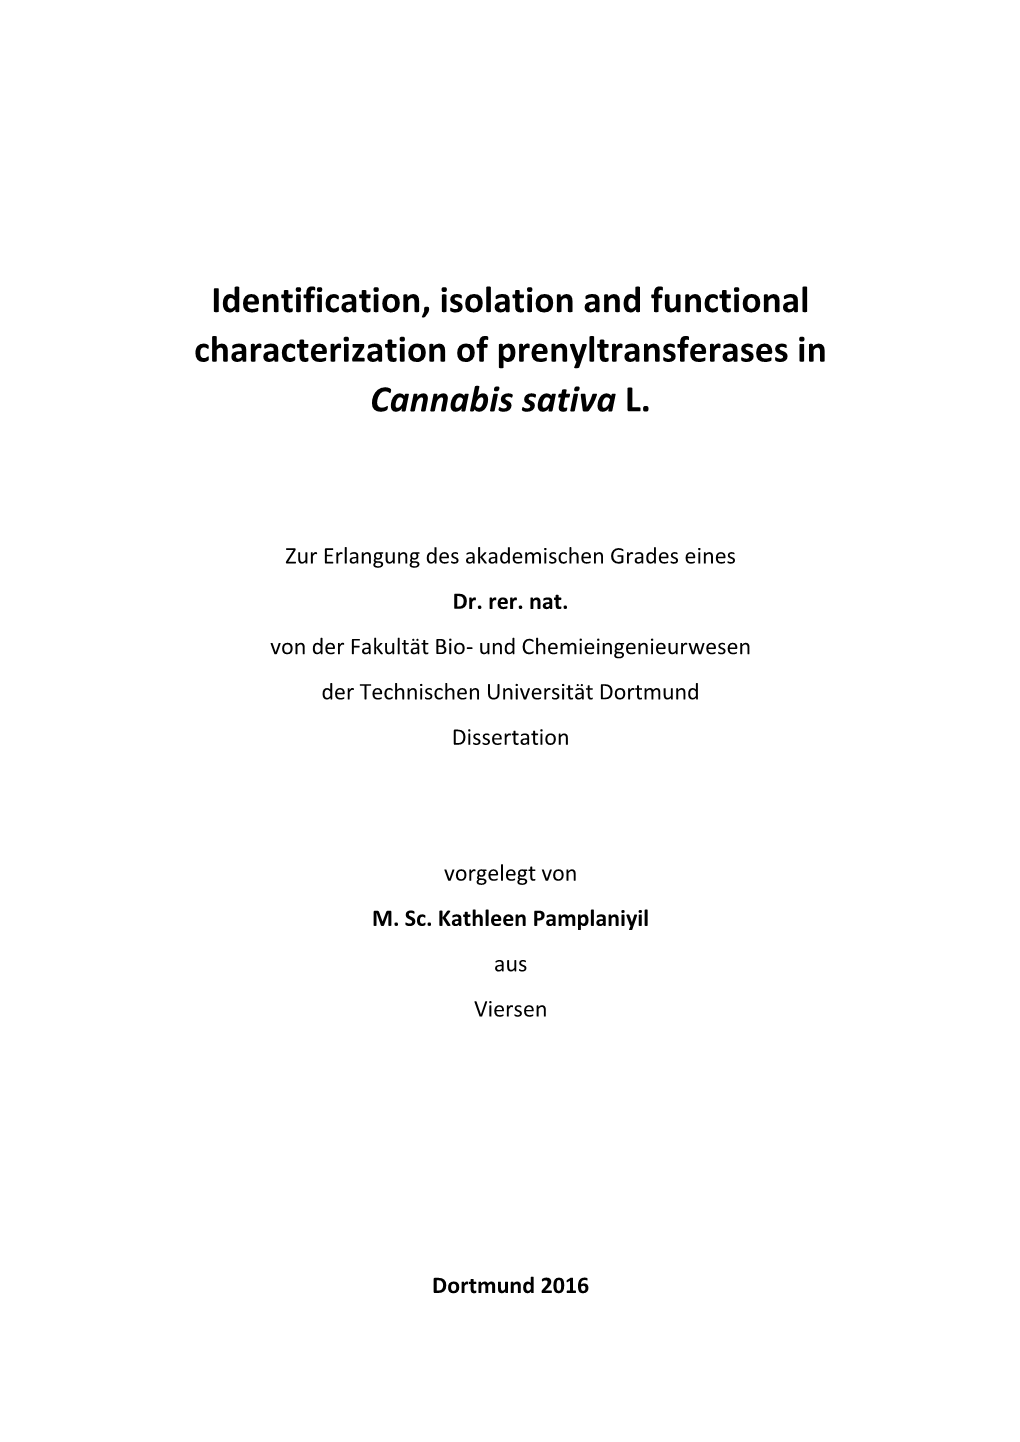 Identification, Isolation and Functional Characterization of Prenyltransferases in Cannabis Sativa L